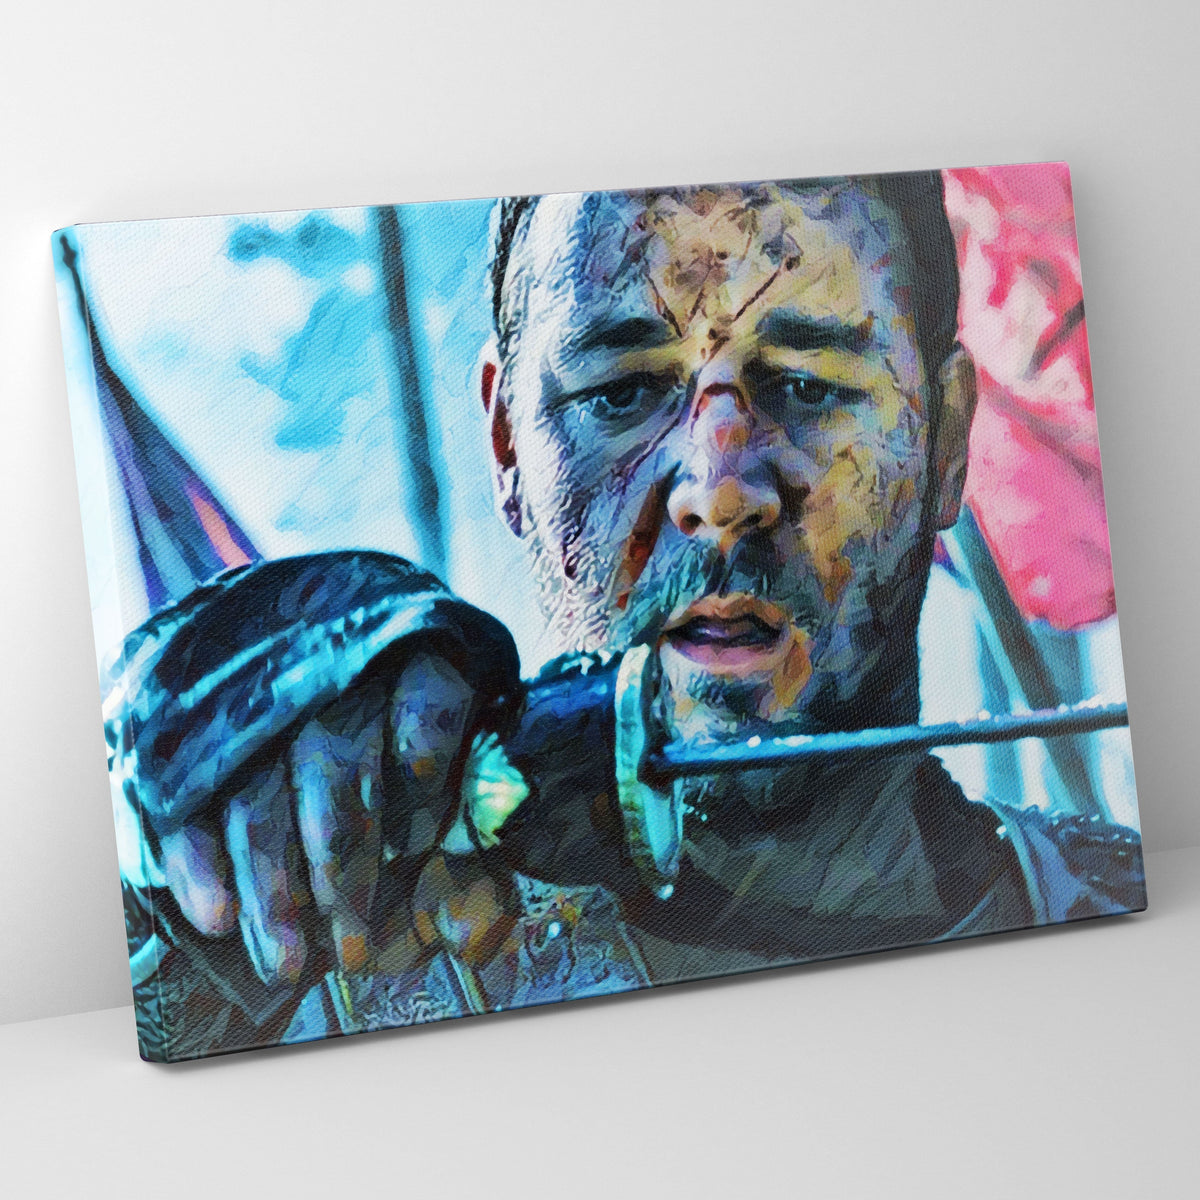 Gladiator Roma Victor Poster/Canvas | Far Out Art 